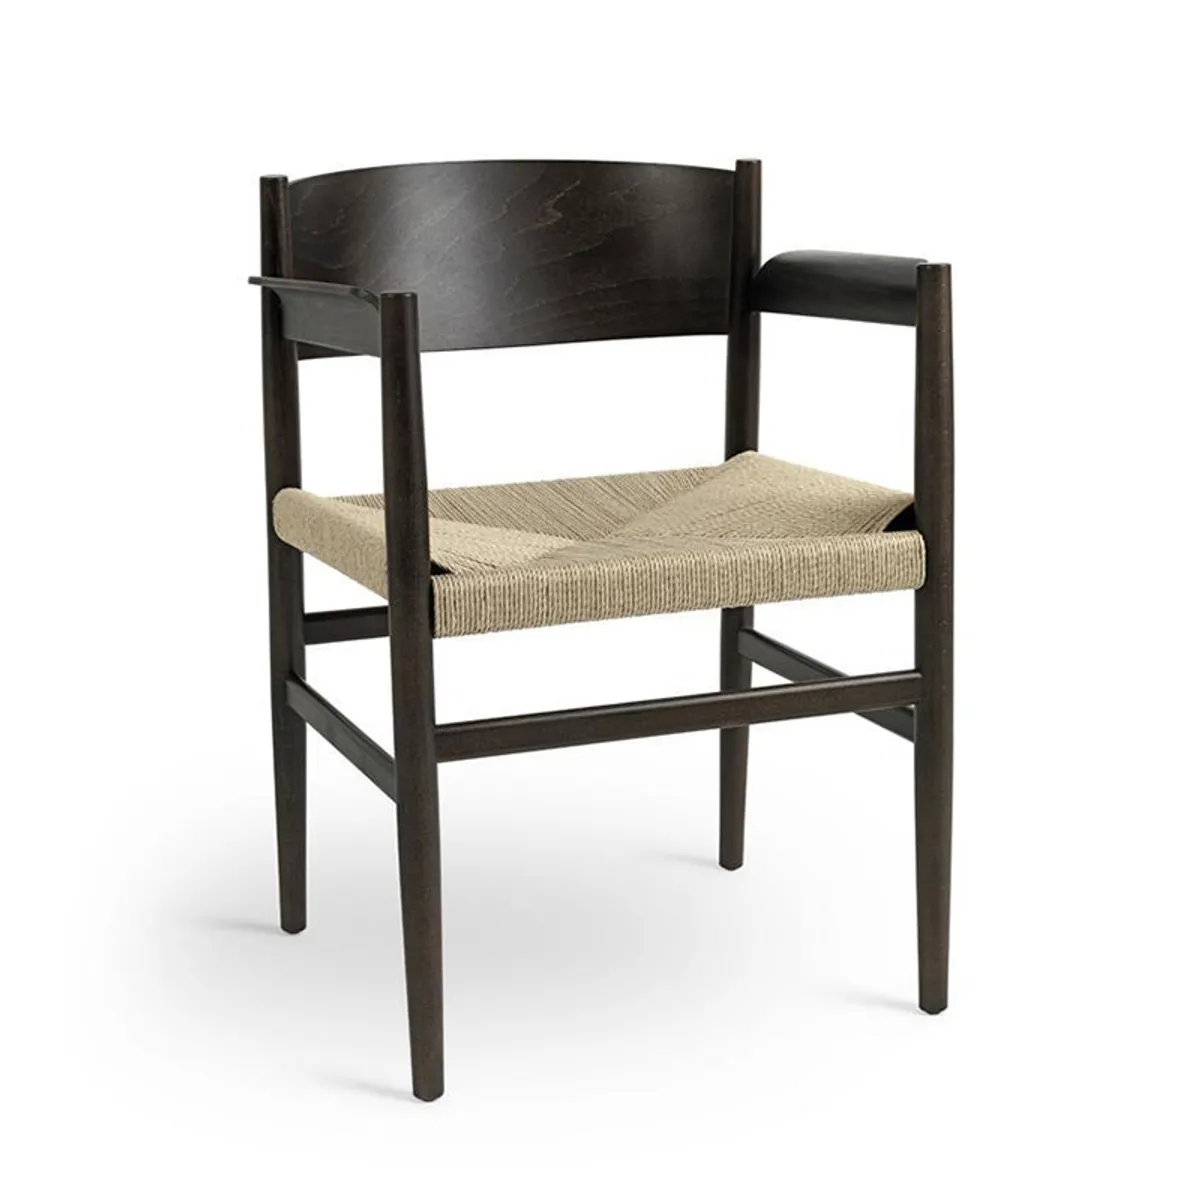 Nestor Armchair Sustainable Furniture In Dark Finish Inside Out Contracts 089